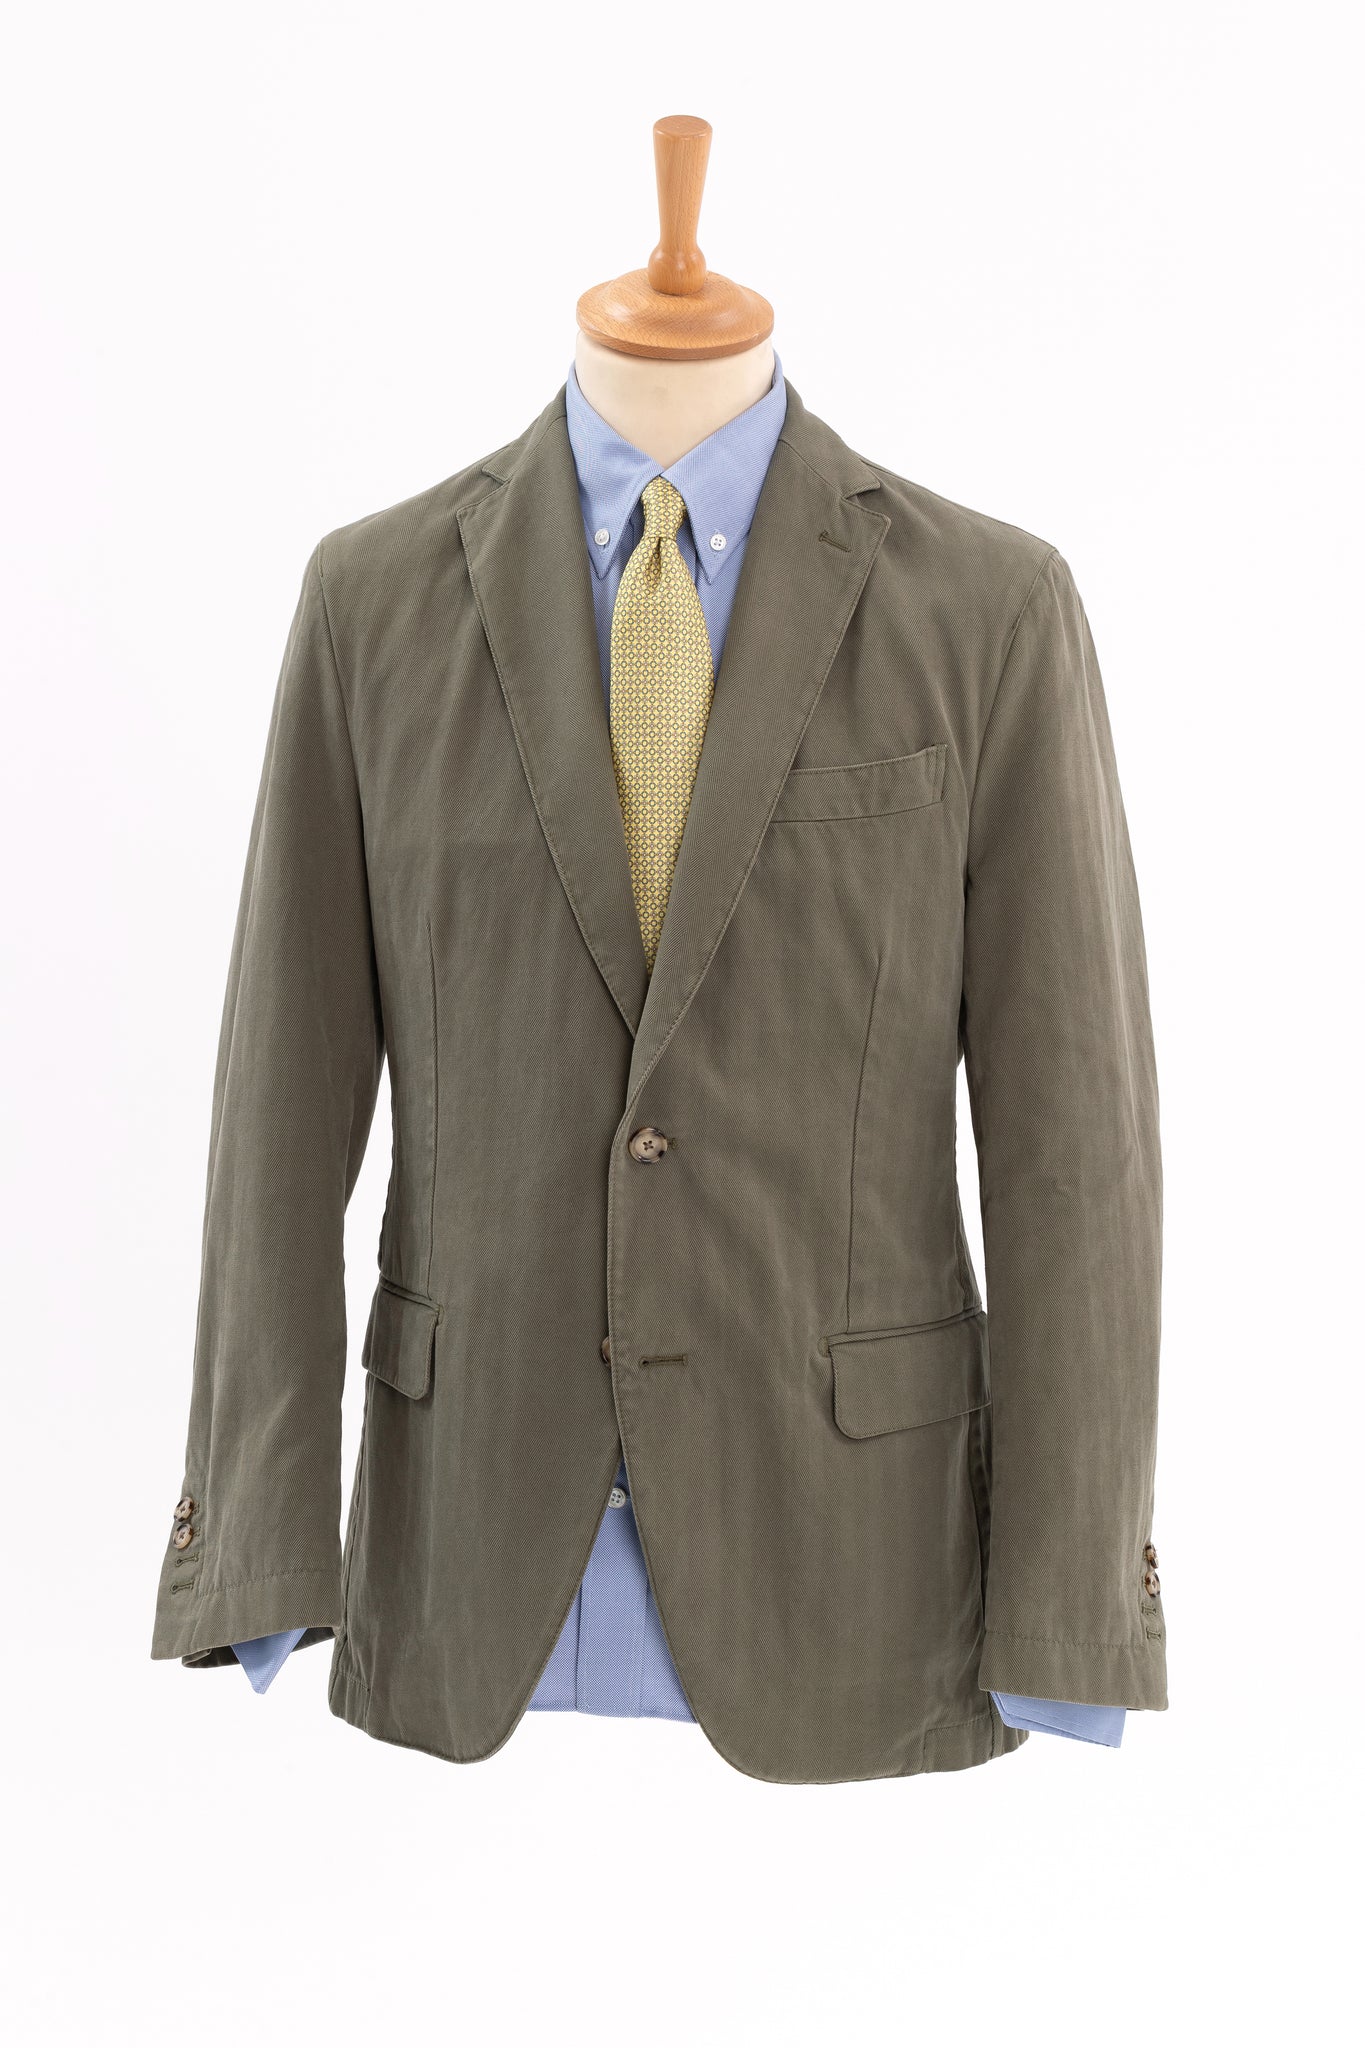 Cotton suit, this unstructured washed cotton suit comes in olive green and is a versatile contemporary alternative to a classic suit. 